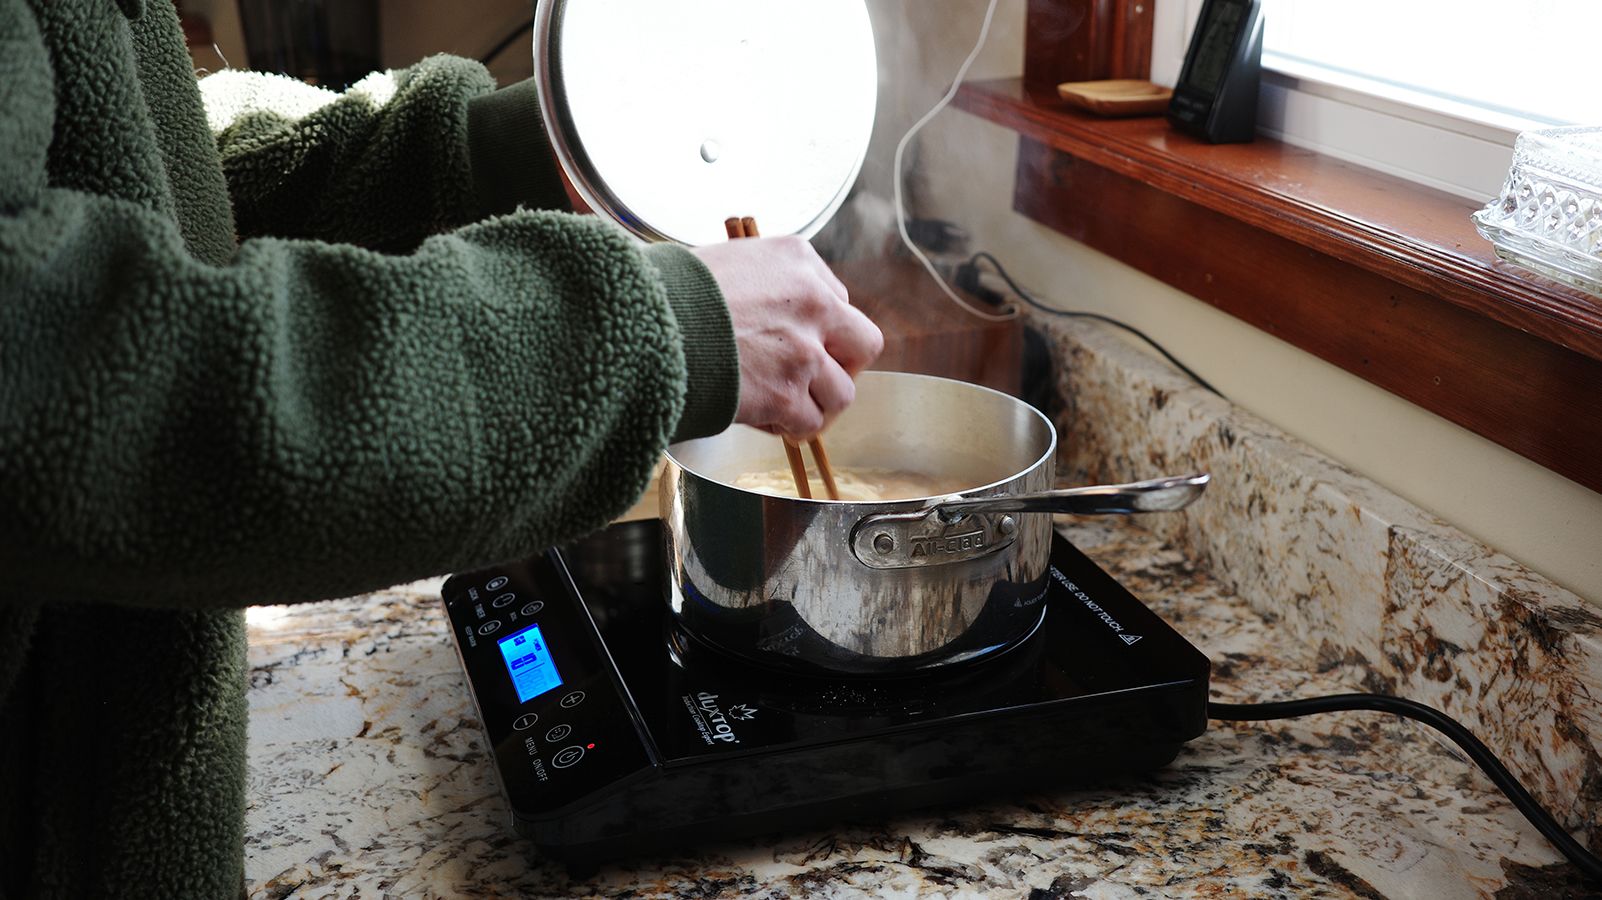 Top 10 Portable Induction Cooktops